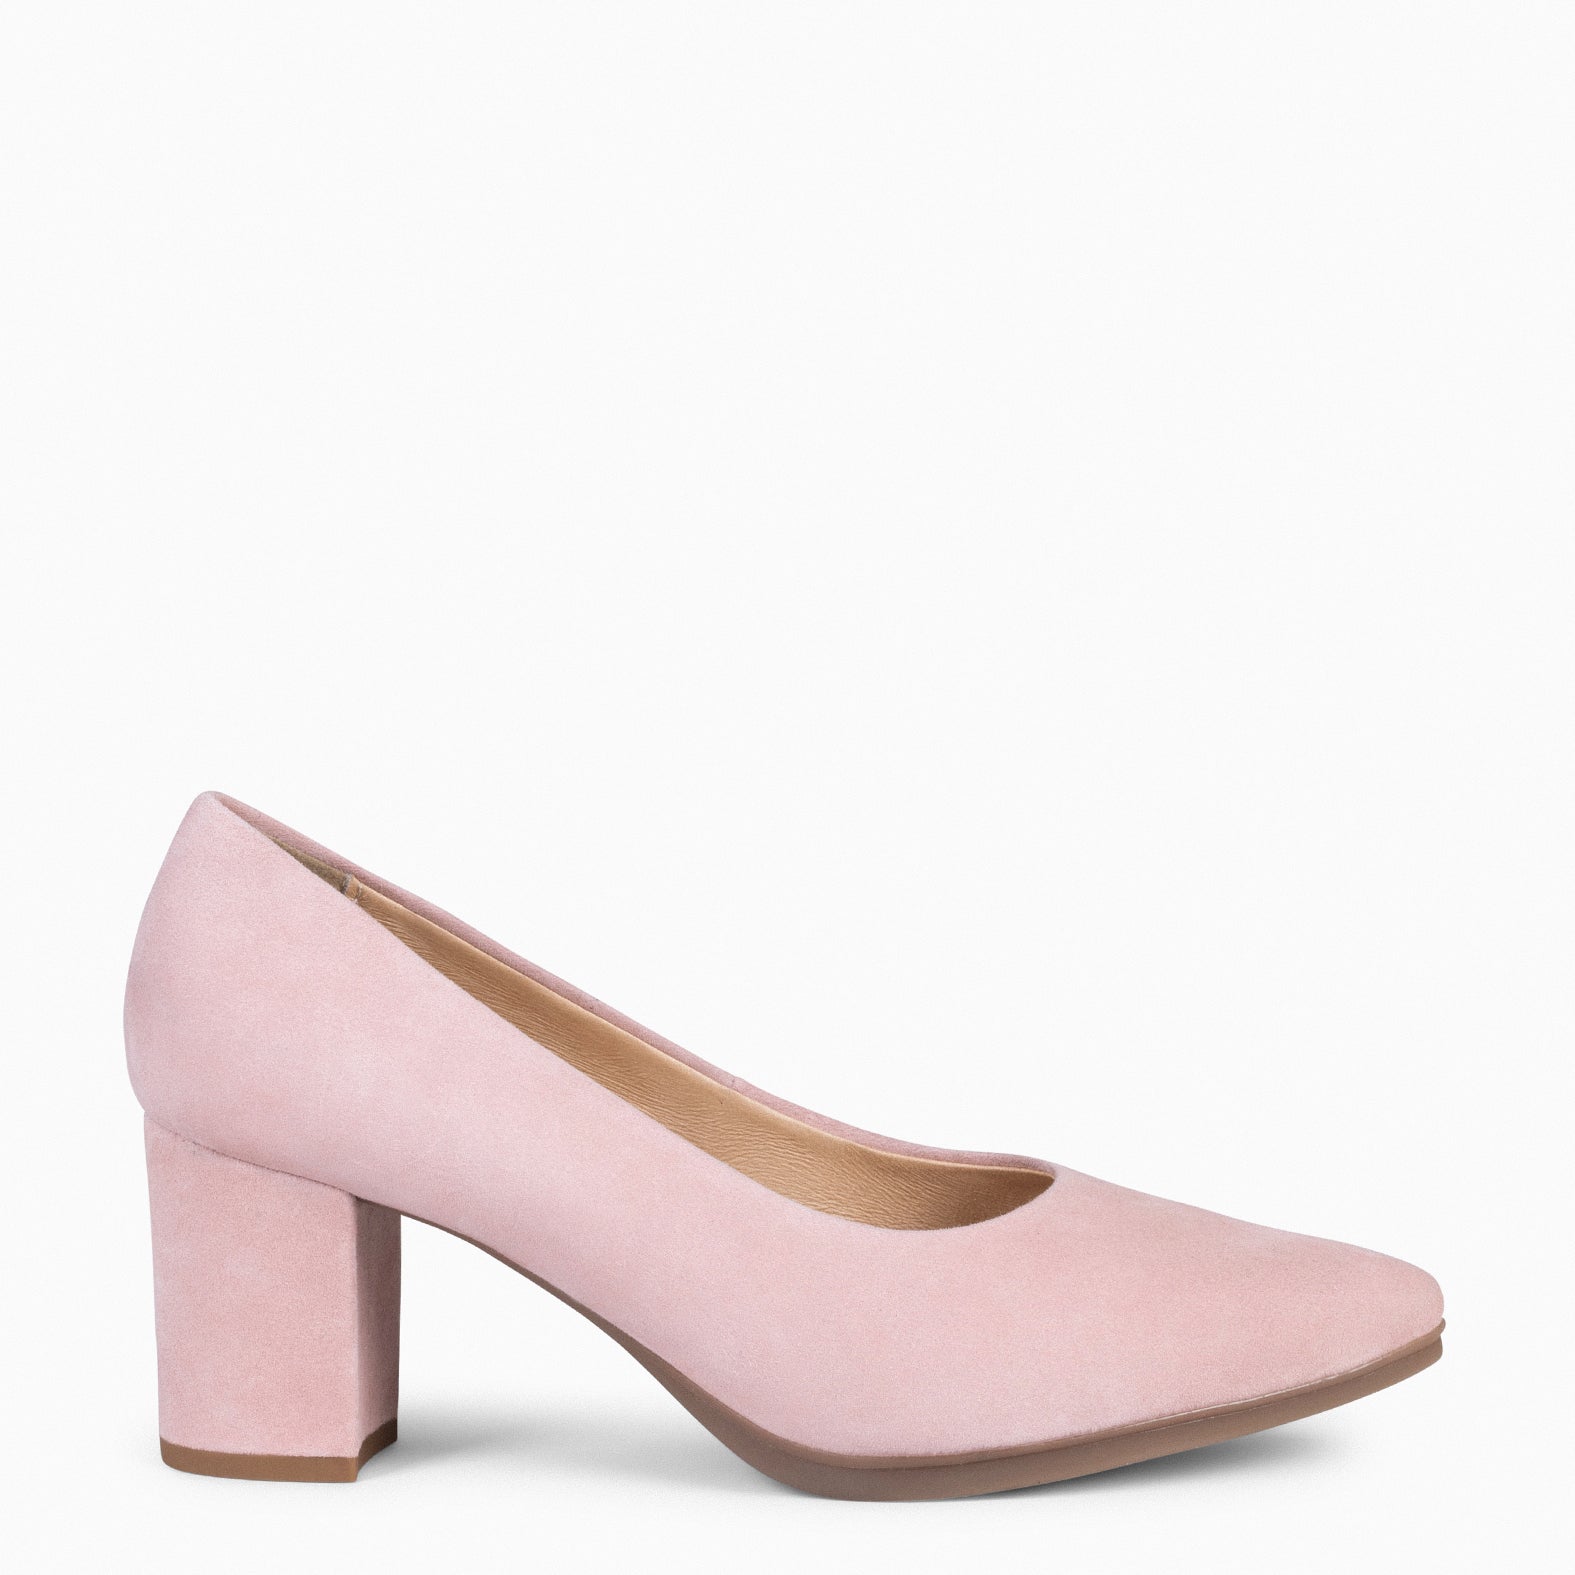 URBAN S – PALE PINK Suede Mid-Heeled Shoes 